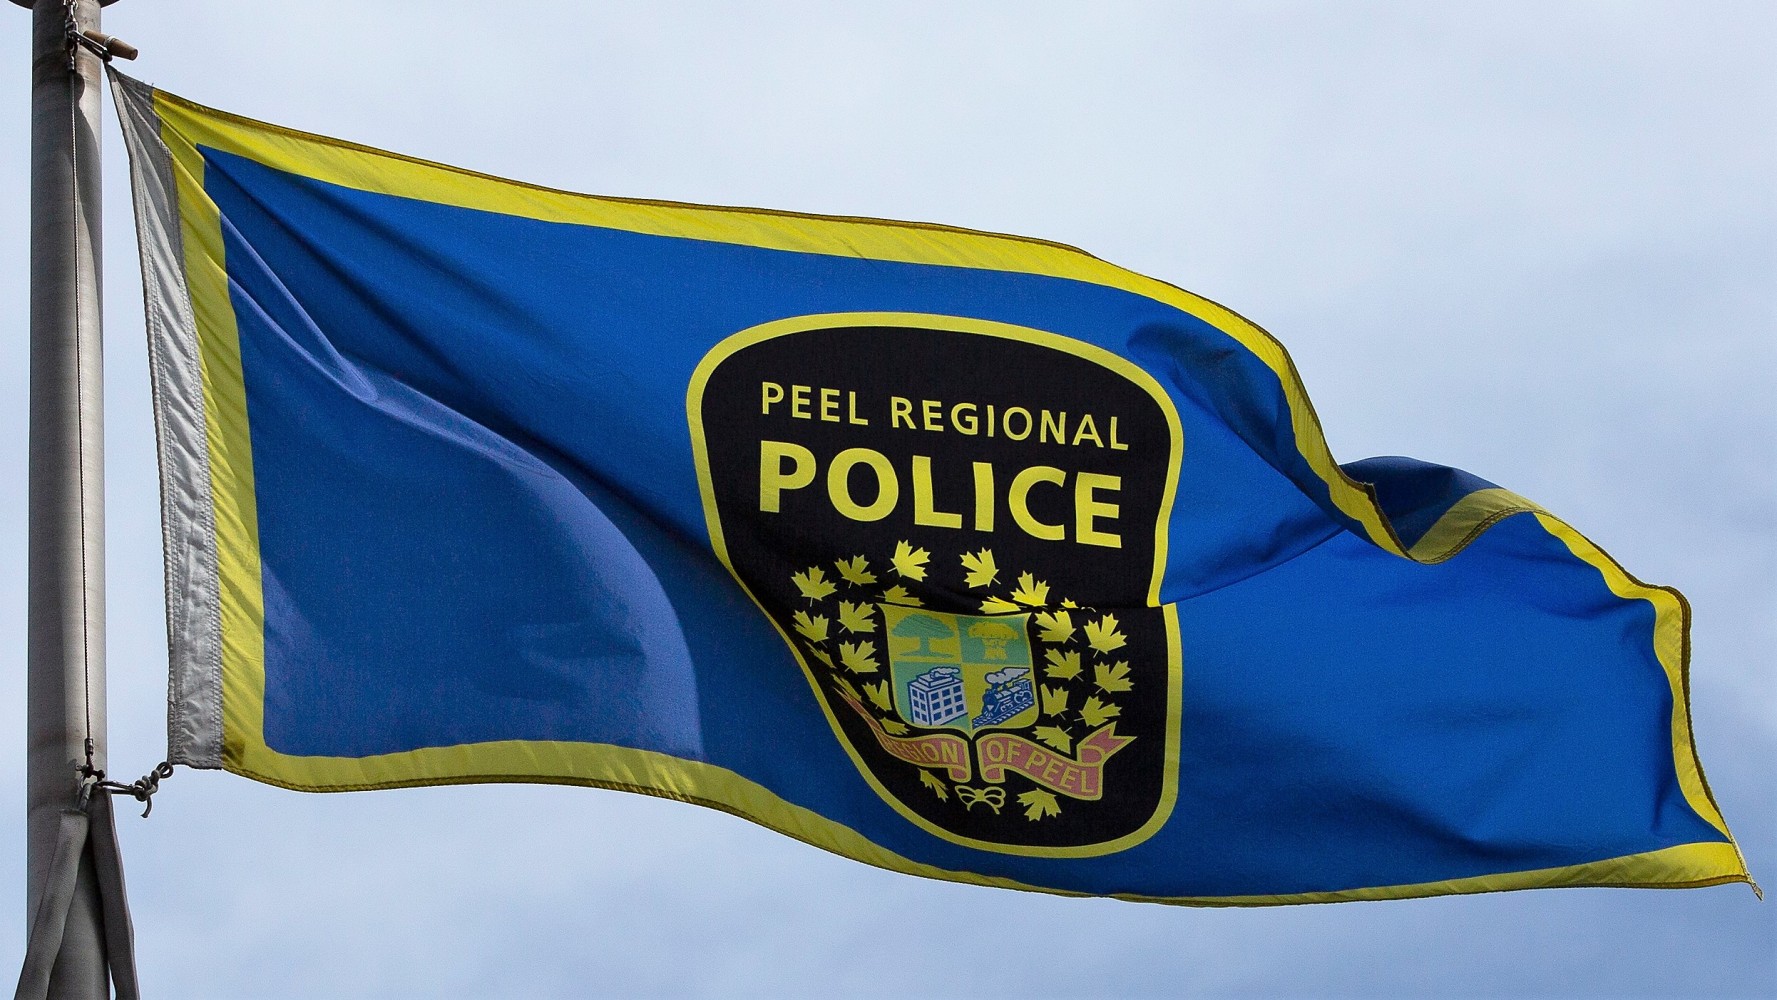 Police statistics affirm fears that violent crime is on the rise in Peel Region